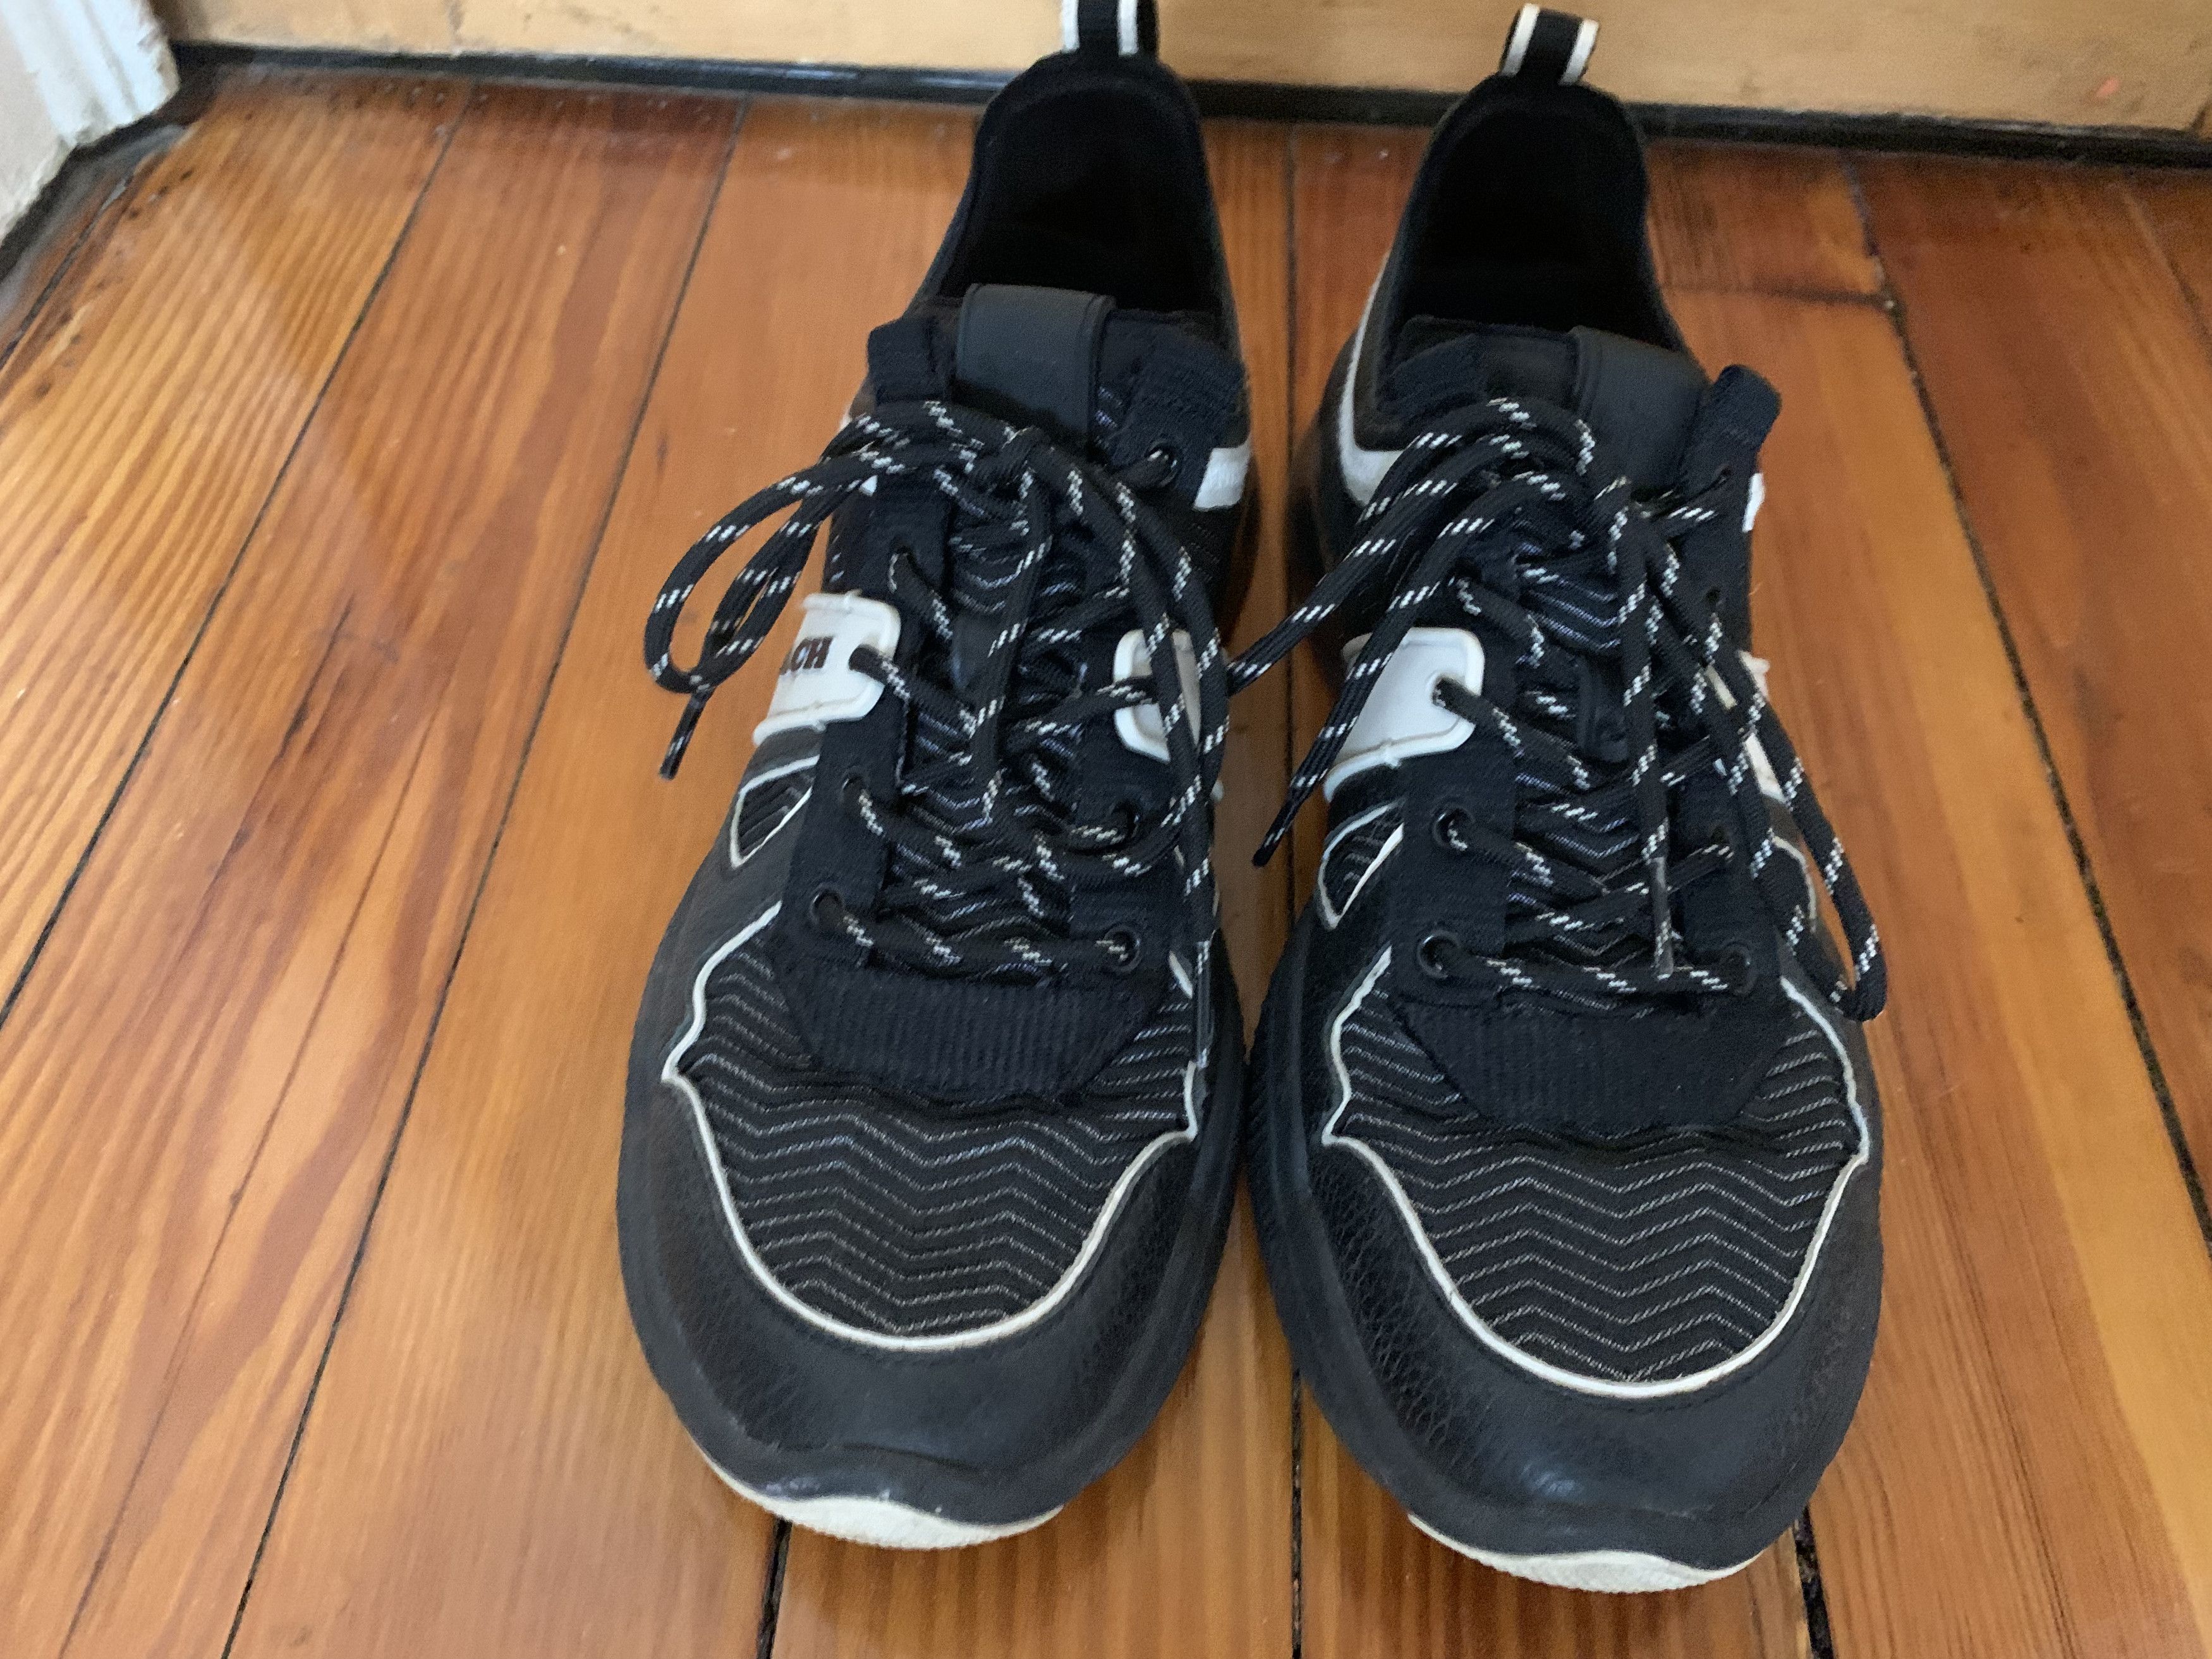 Coach Black and White Coach Athleissure Sneakers Size US 9 / EU 42 - 3 Thumbnail